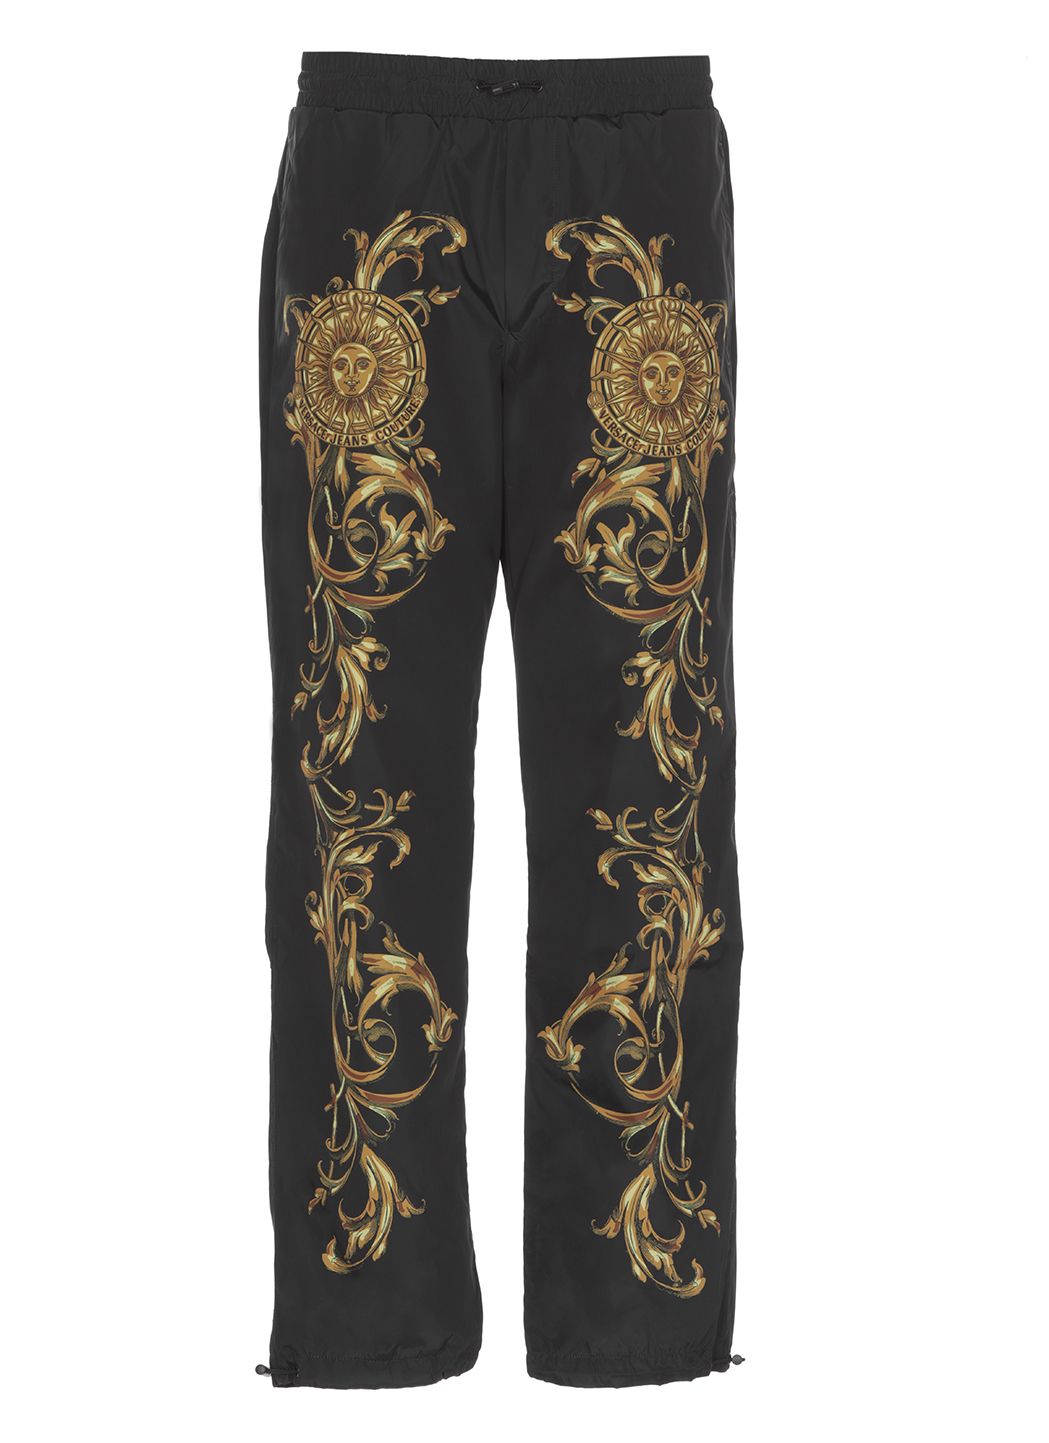 Garland trousers